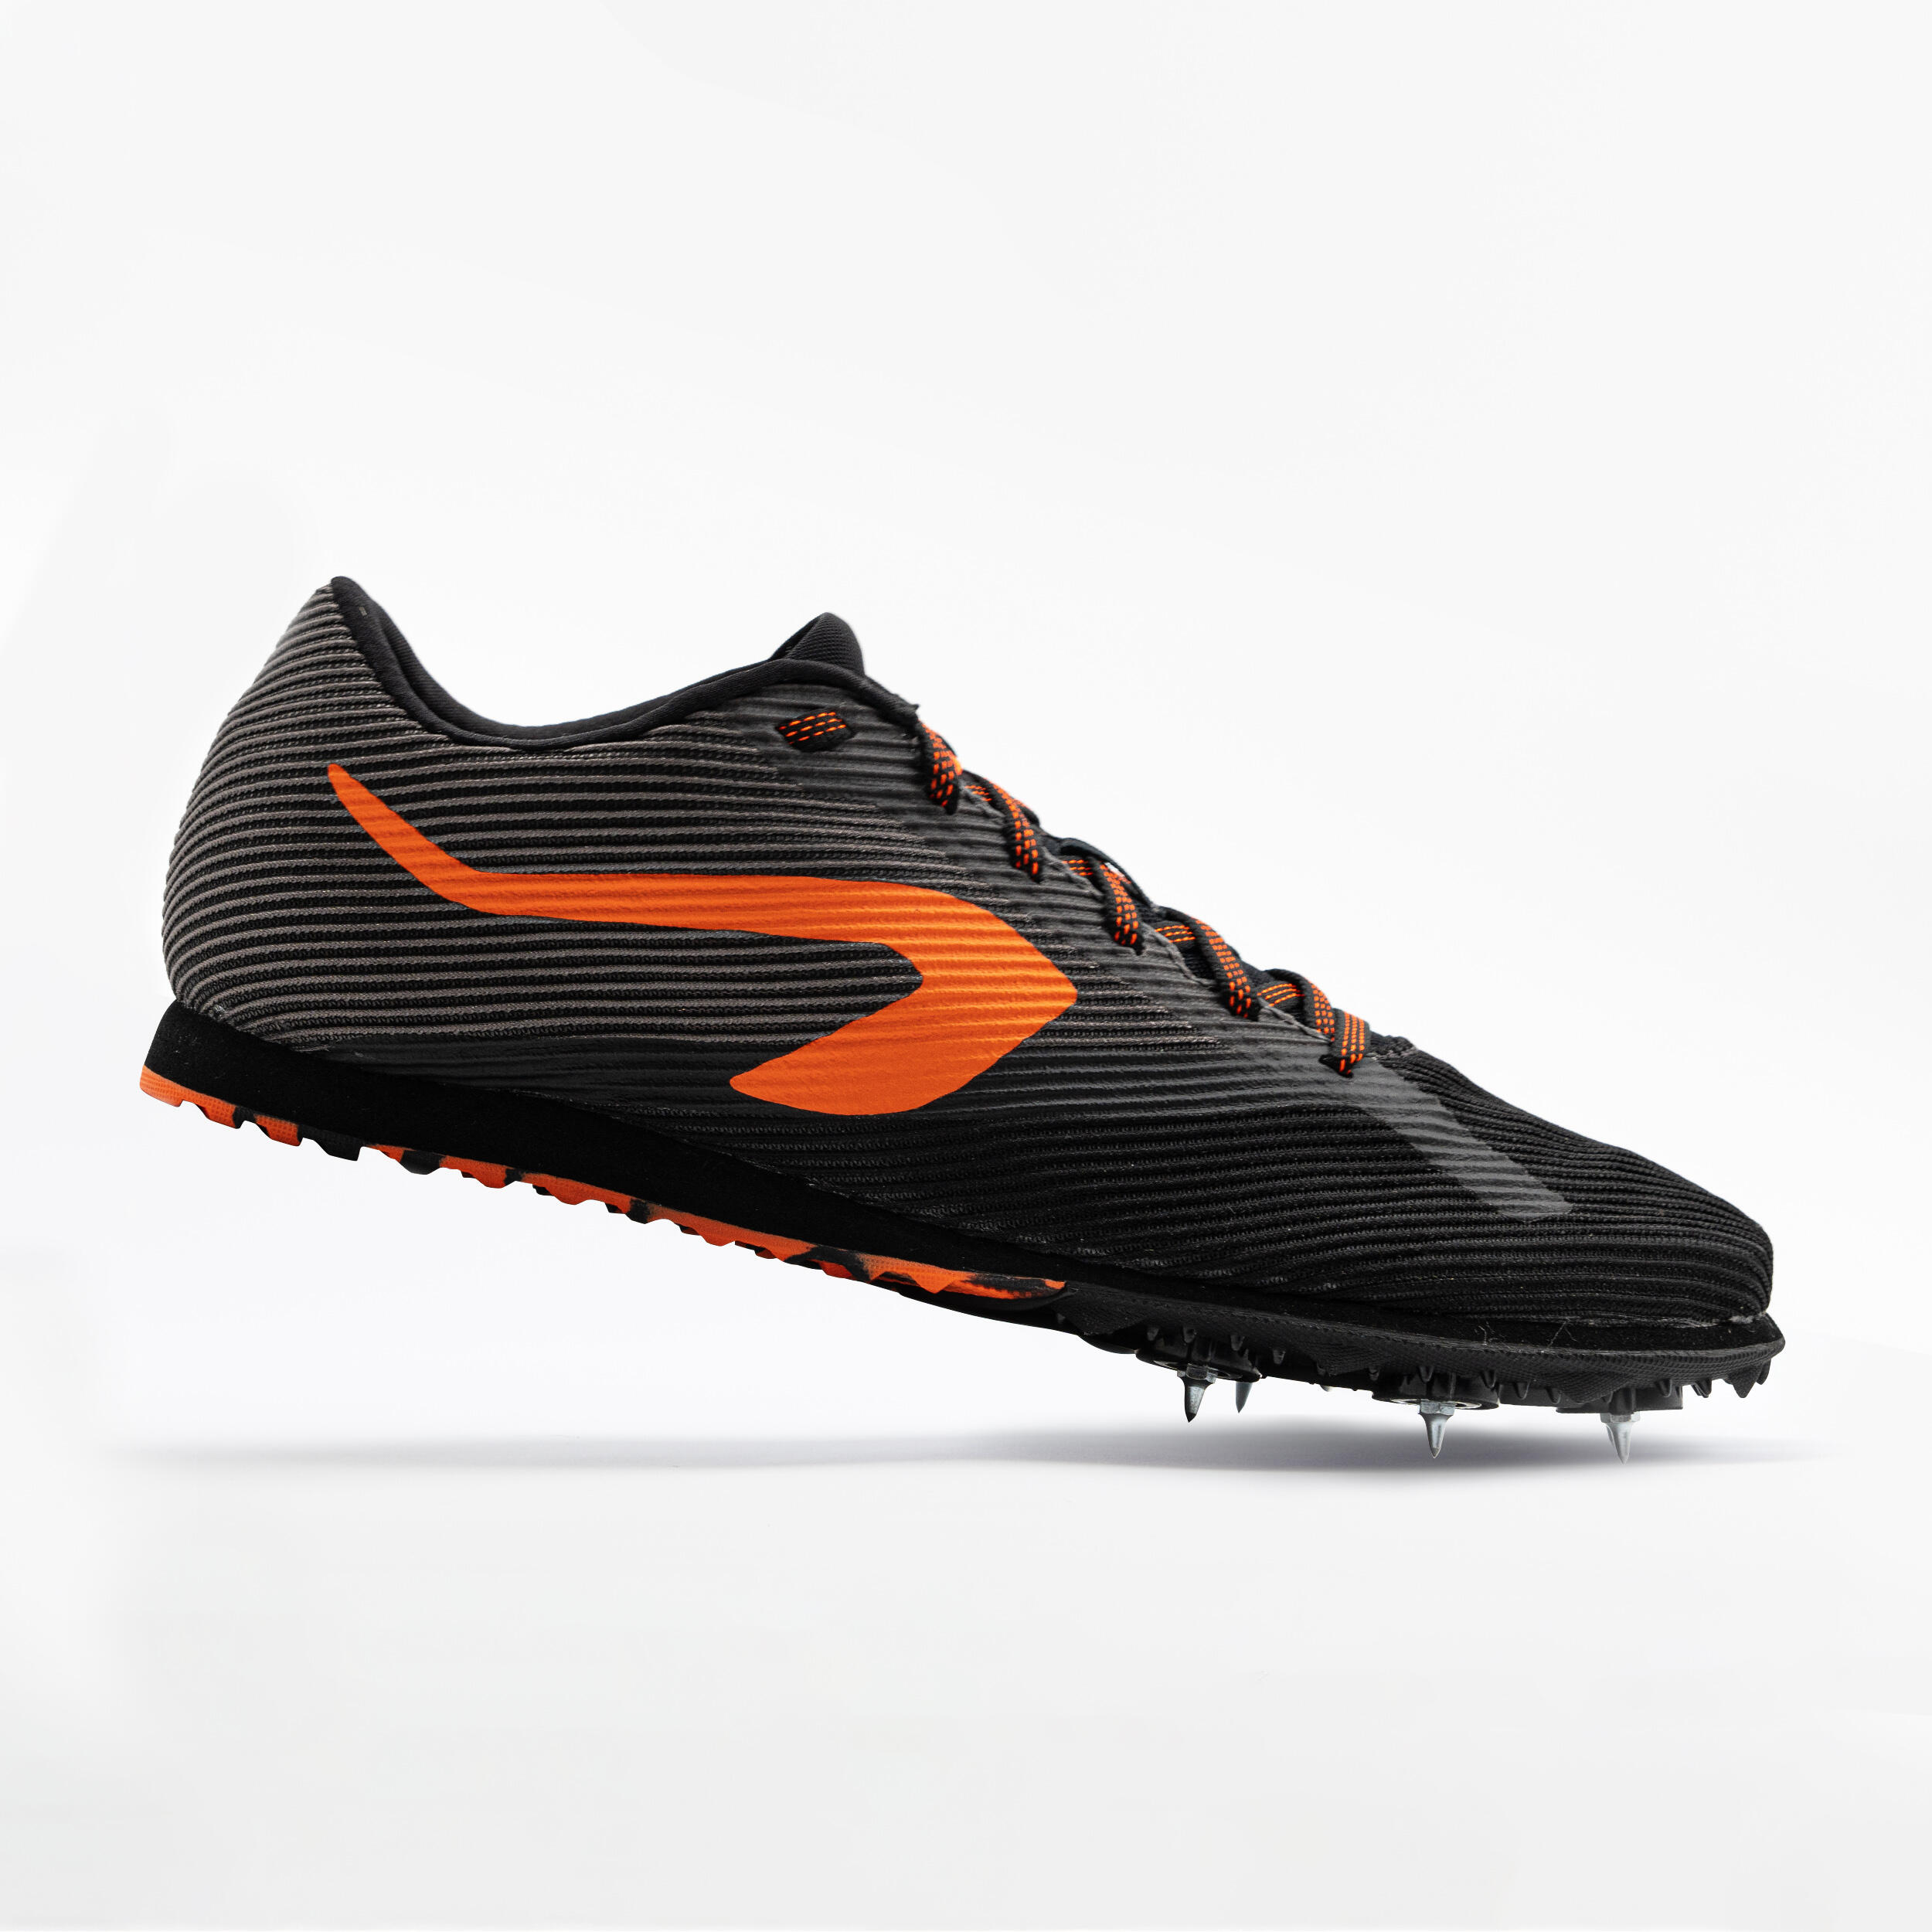 ATHLETICS CROSS-COUNTRY SHOES WITH 